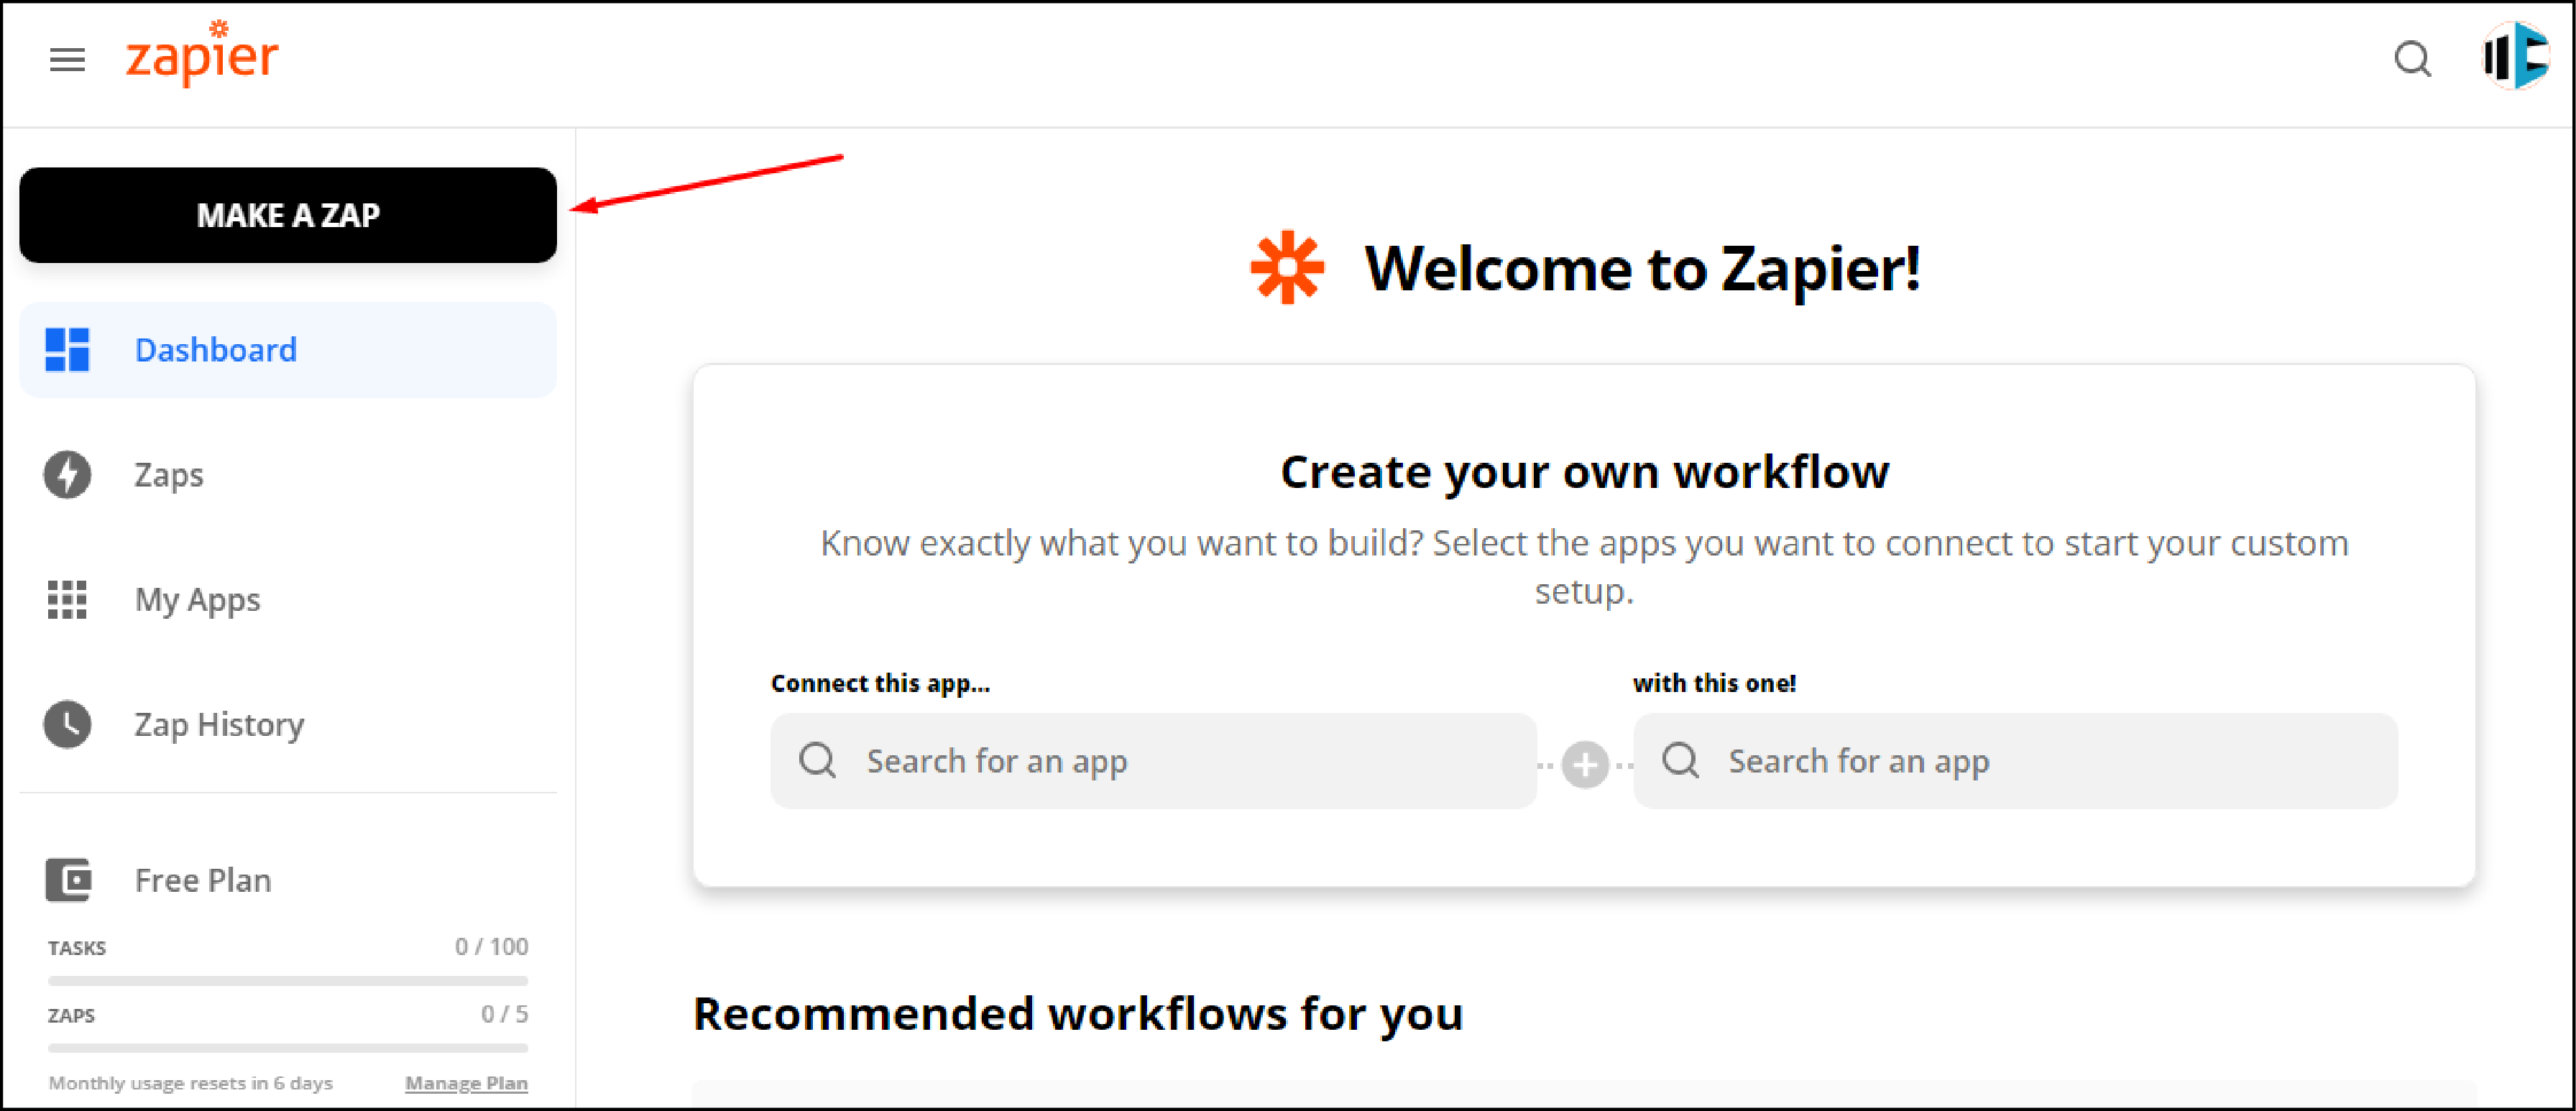 How to Set Up Zoho CRM with Magento 2